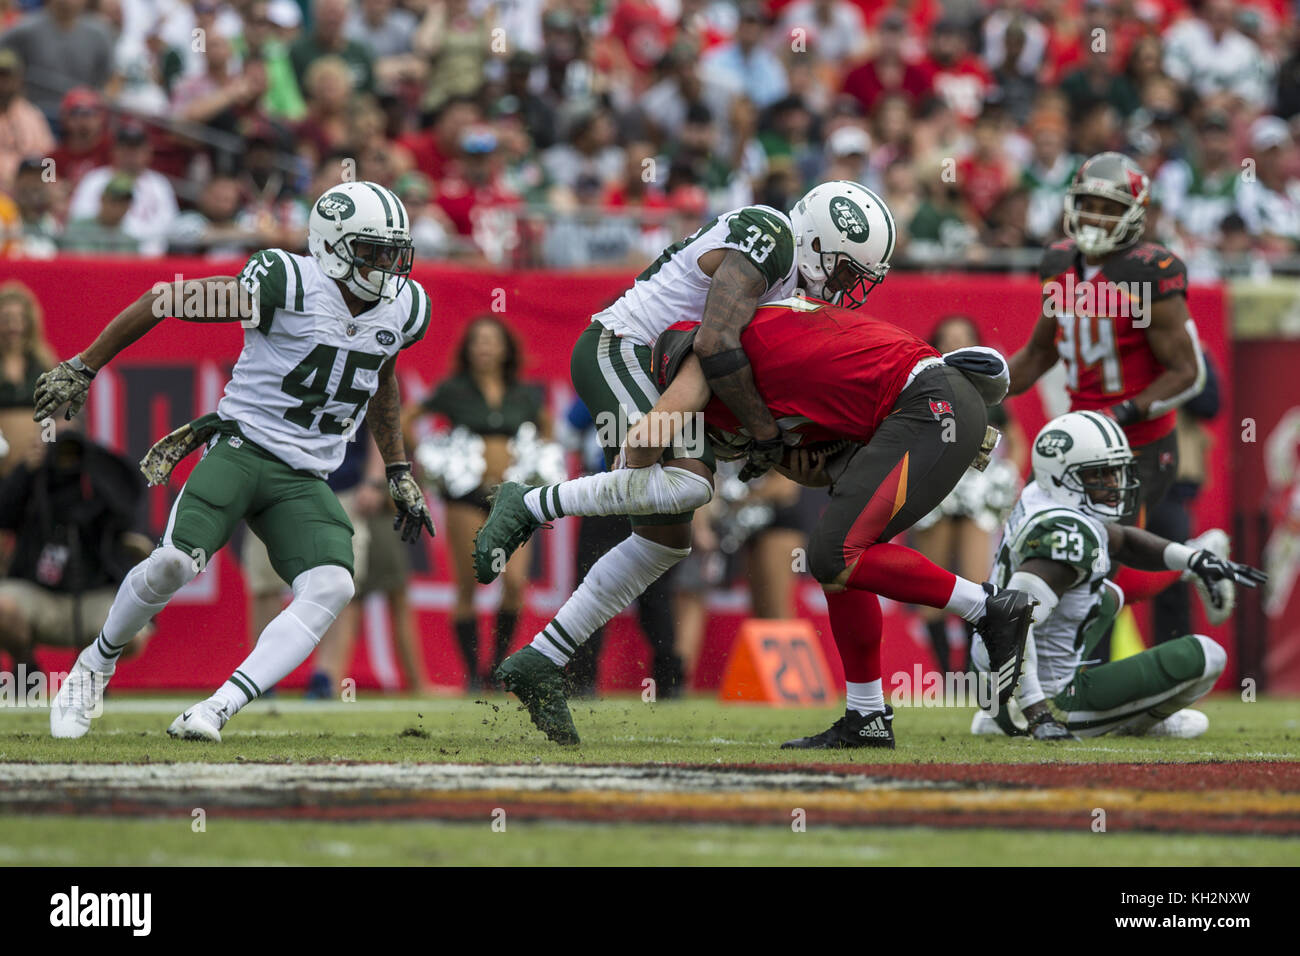 Tampa, Florida, USA. 31st Aug, 2017. New York Jets strong safety Jamal Adams (33) brings down Tampa Bay Buccaneers quarterback Ryan Fitzpatrick (14) during the game on Sunday November 12, 2017 at Raymond James Stadium in Tampa, Florida. Credit: Travis Pendergrass/ZUMA Wire/Alamy Live News Stock Photo